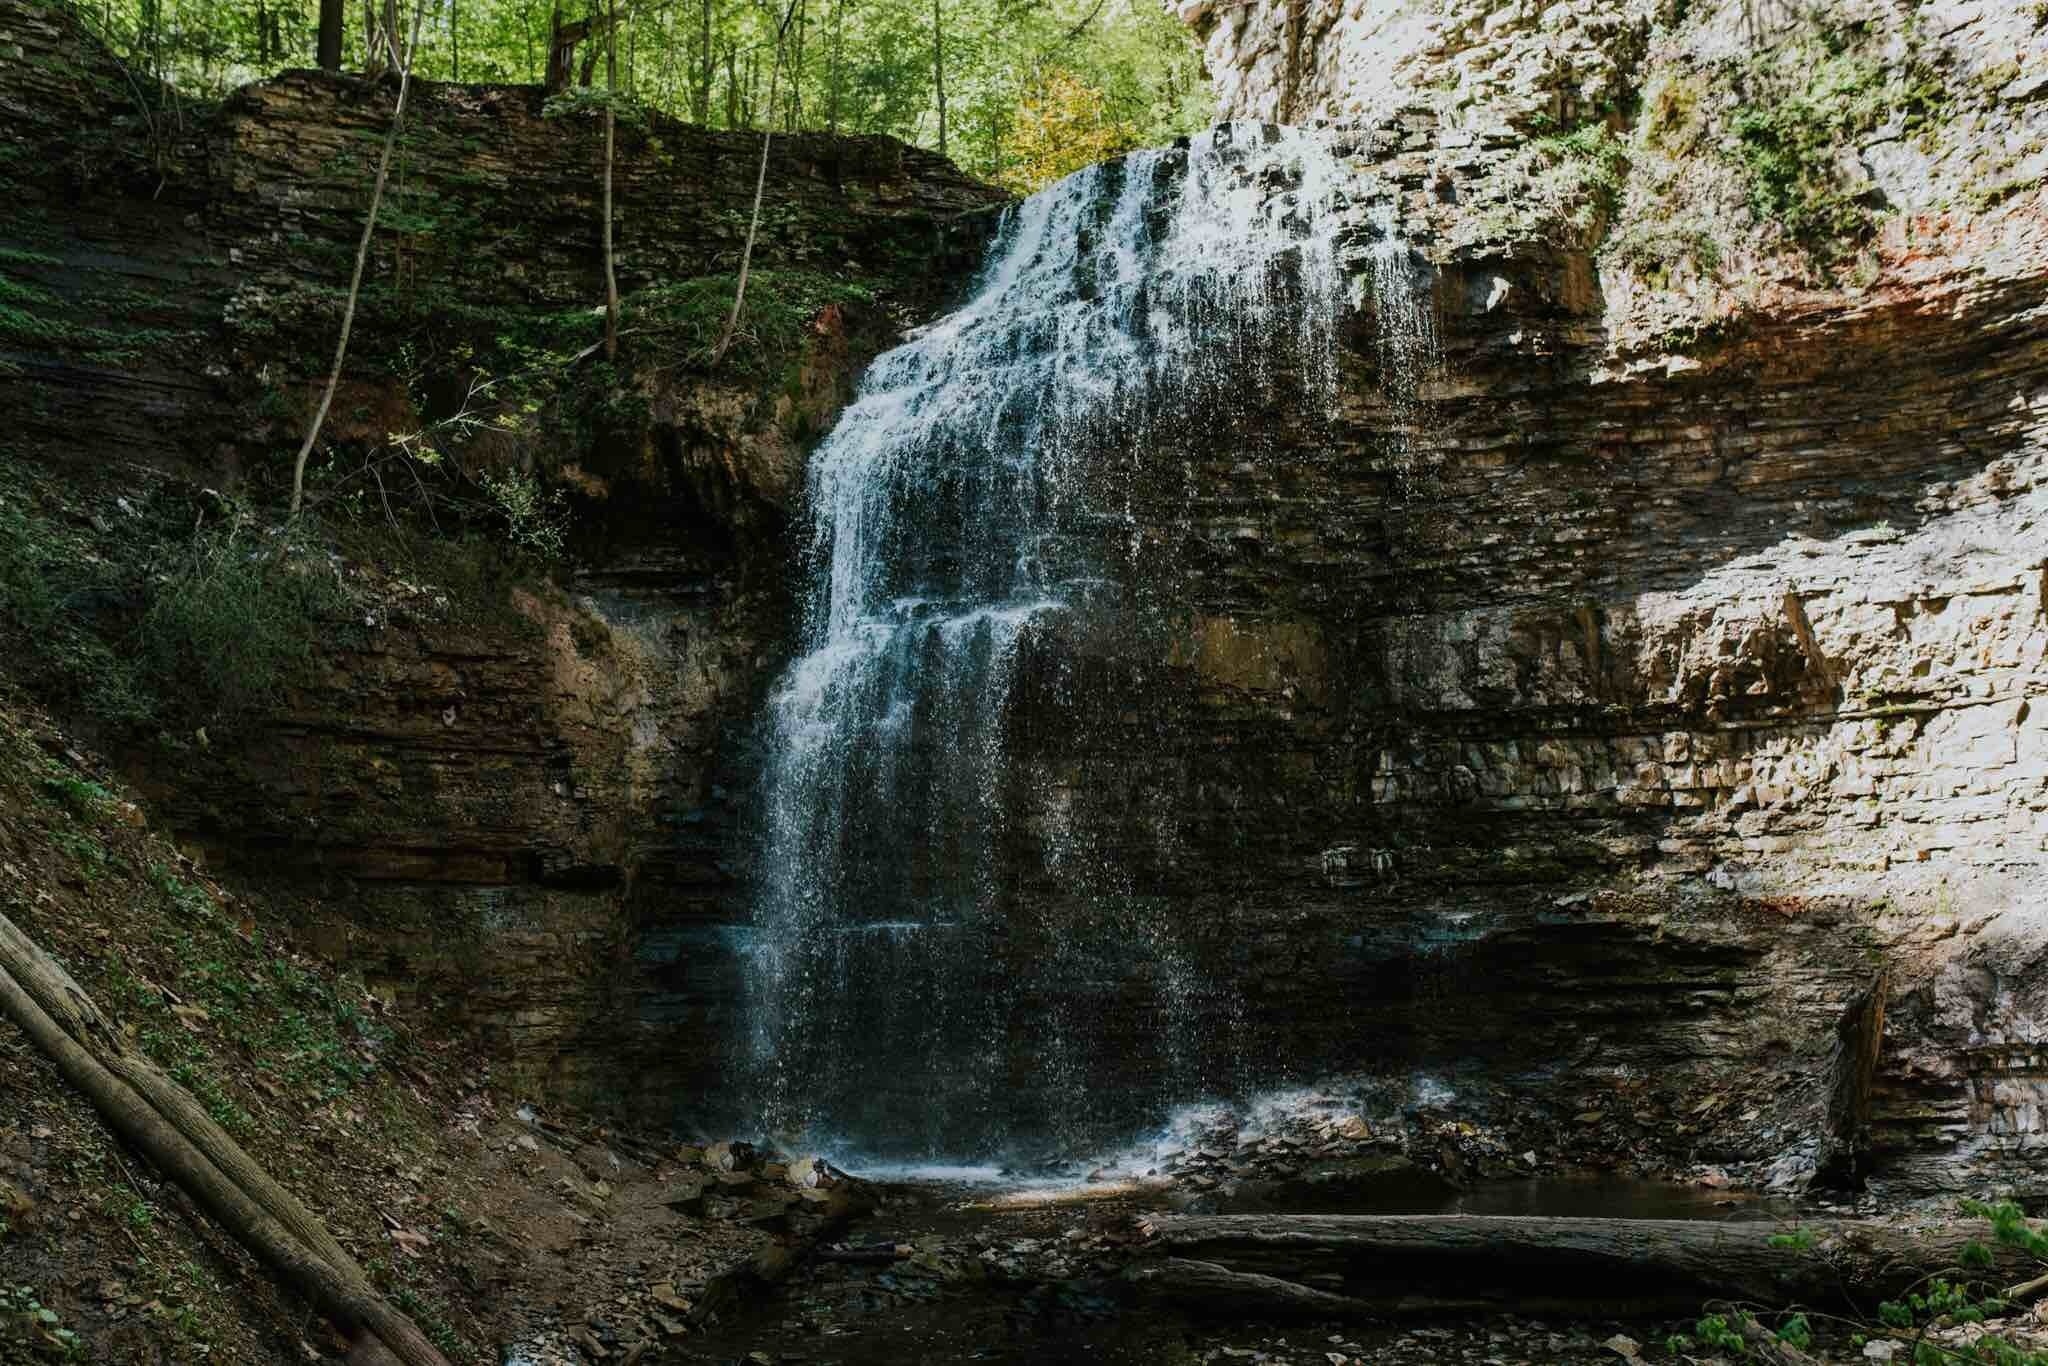 Beautiful waterfall, a short hike from the parking area. Parking is limited so get there early!